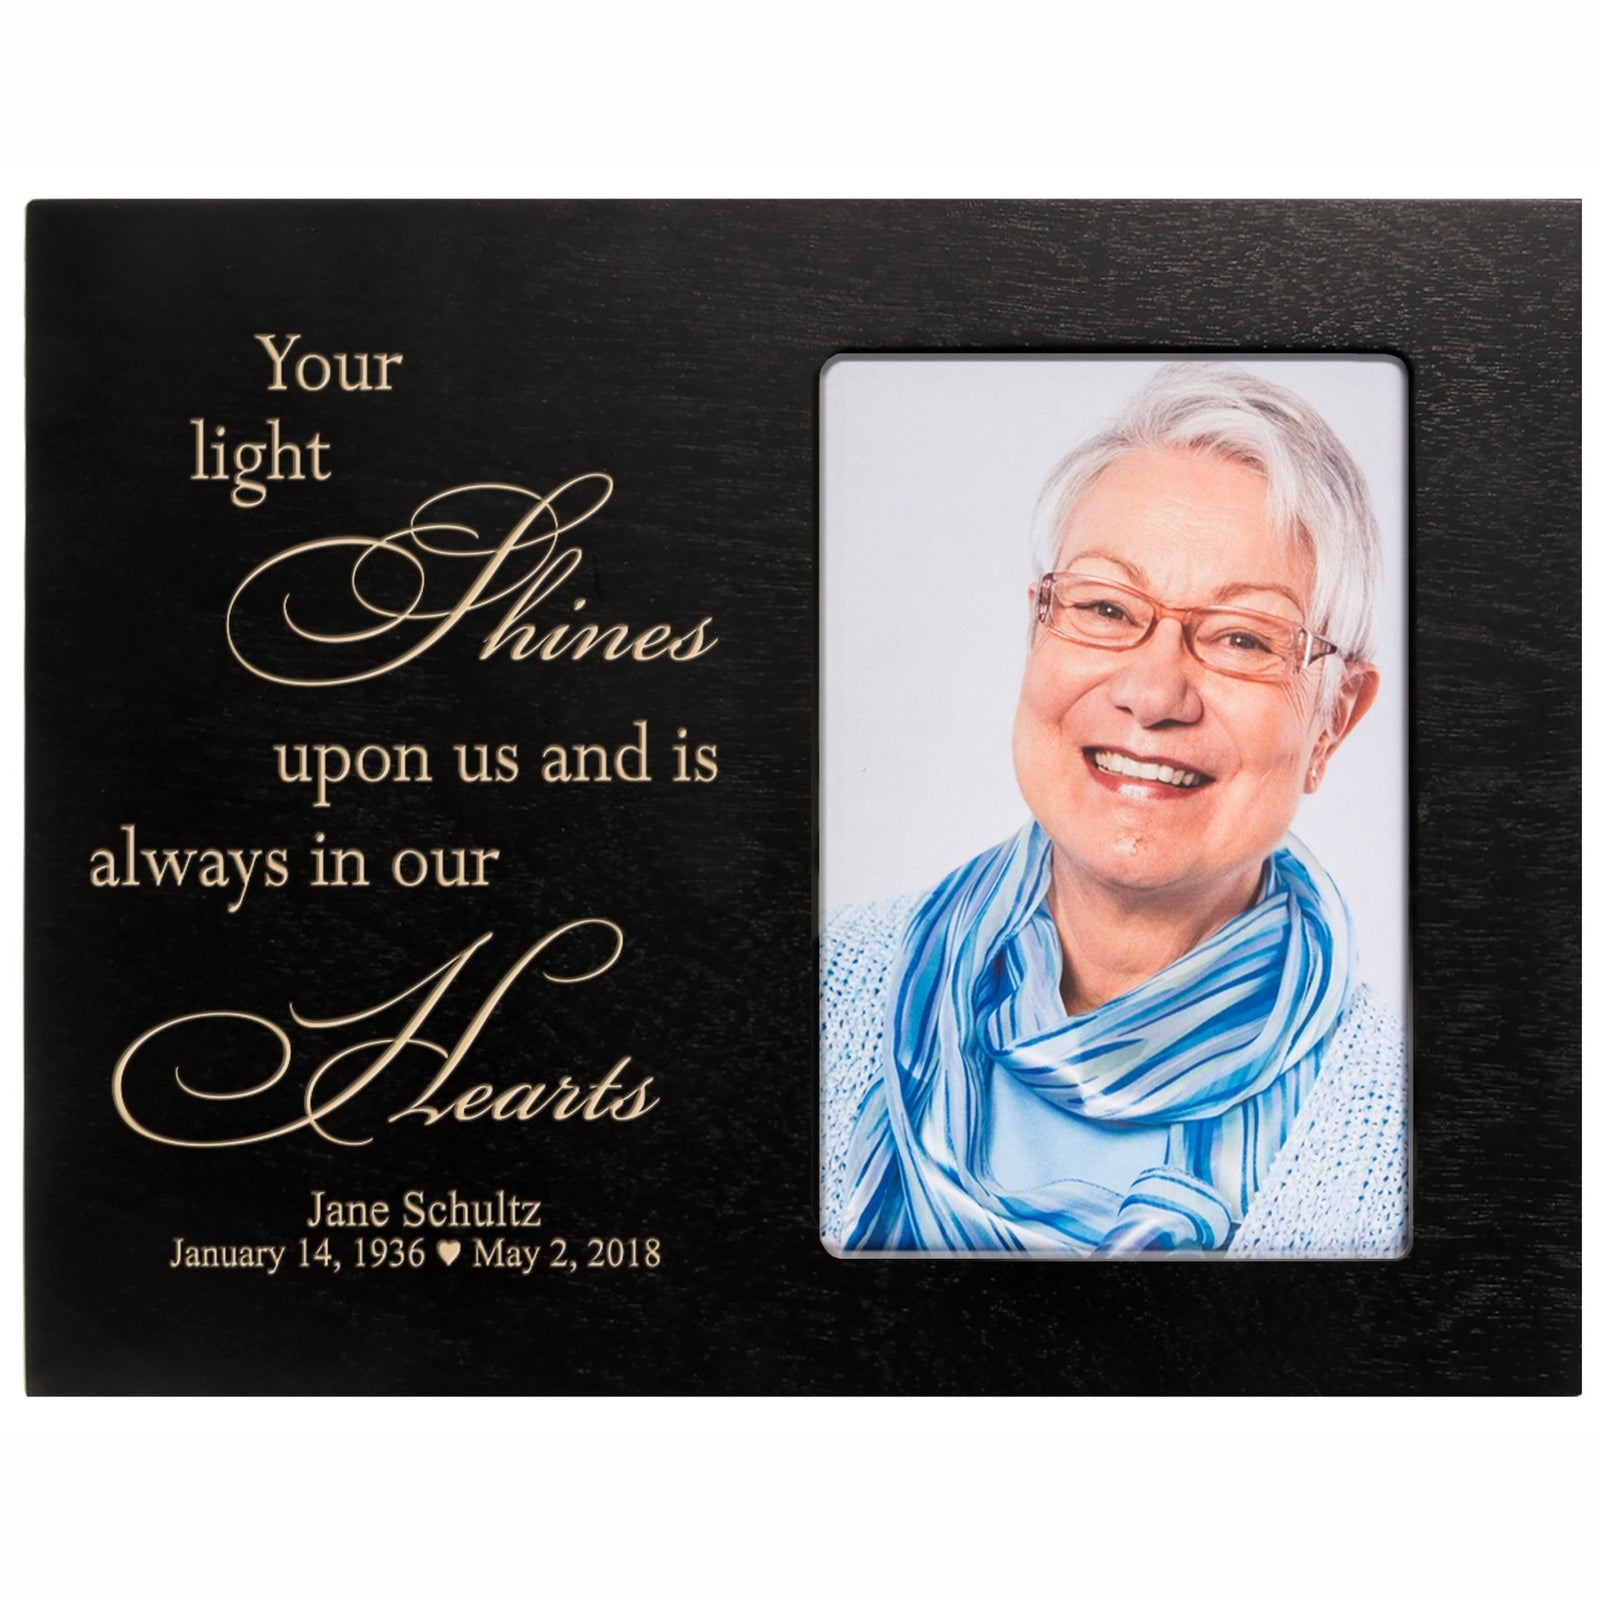 Personalized Horizontal 8x10 Wooden Memorial Picture Frame Holds 4x6 Photo - Your Light Shines - LifeSong Milestones